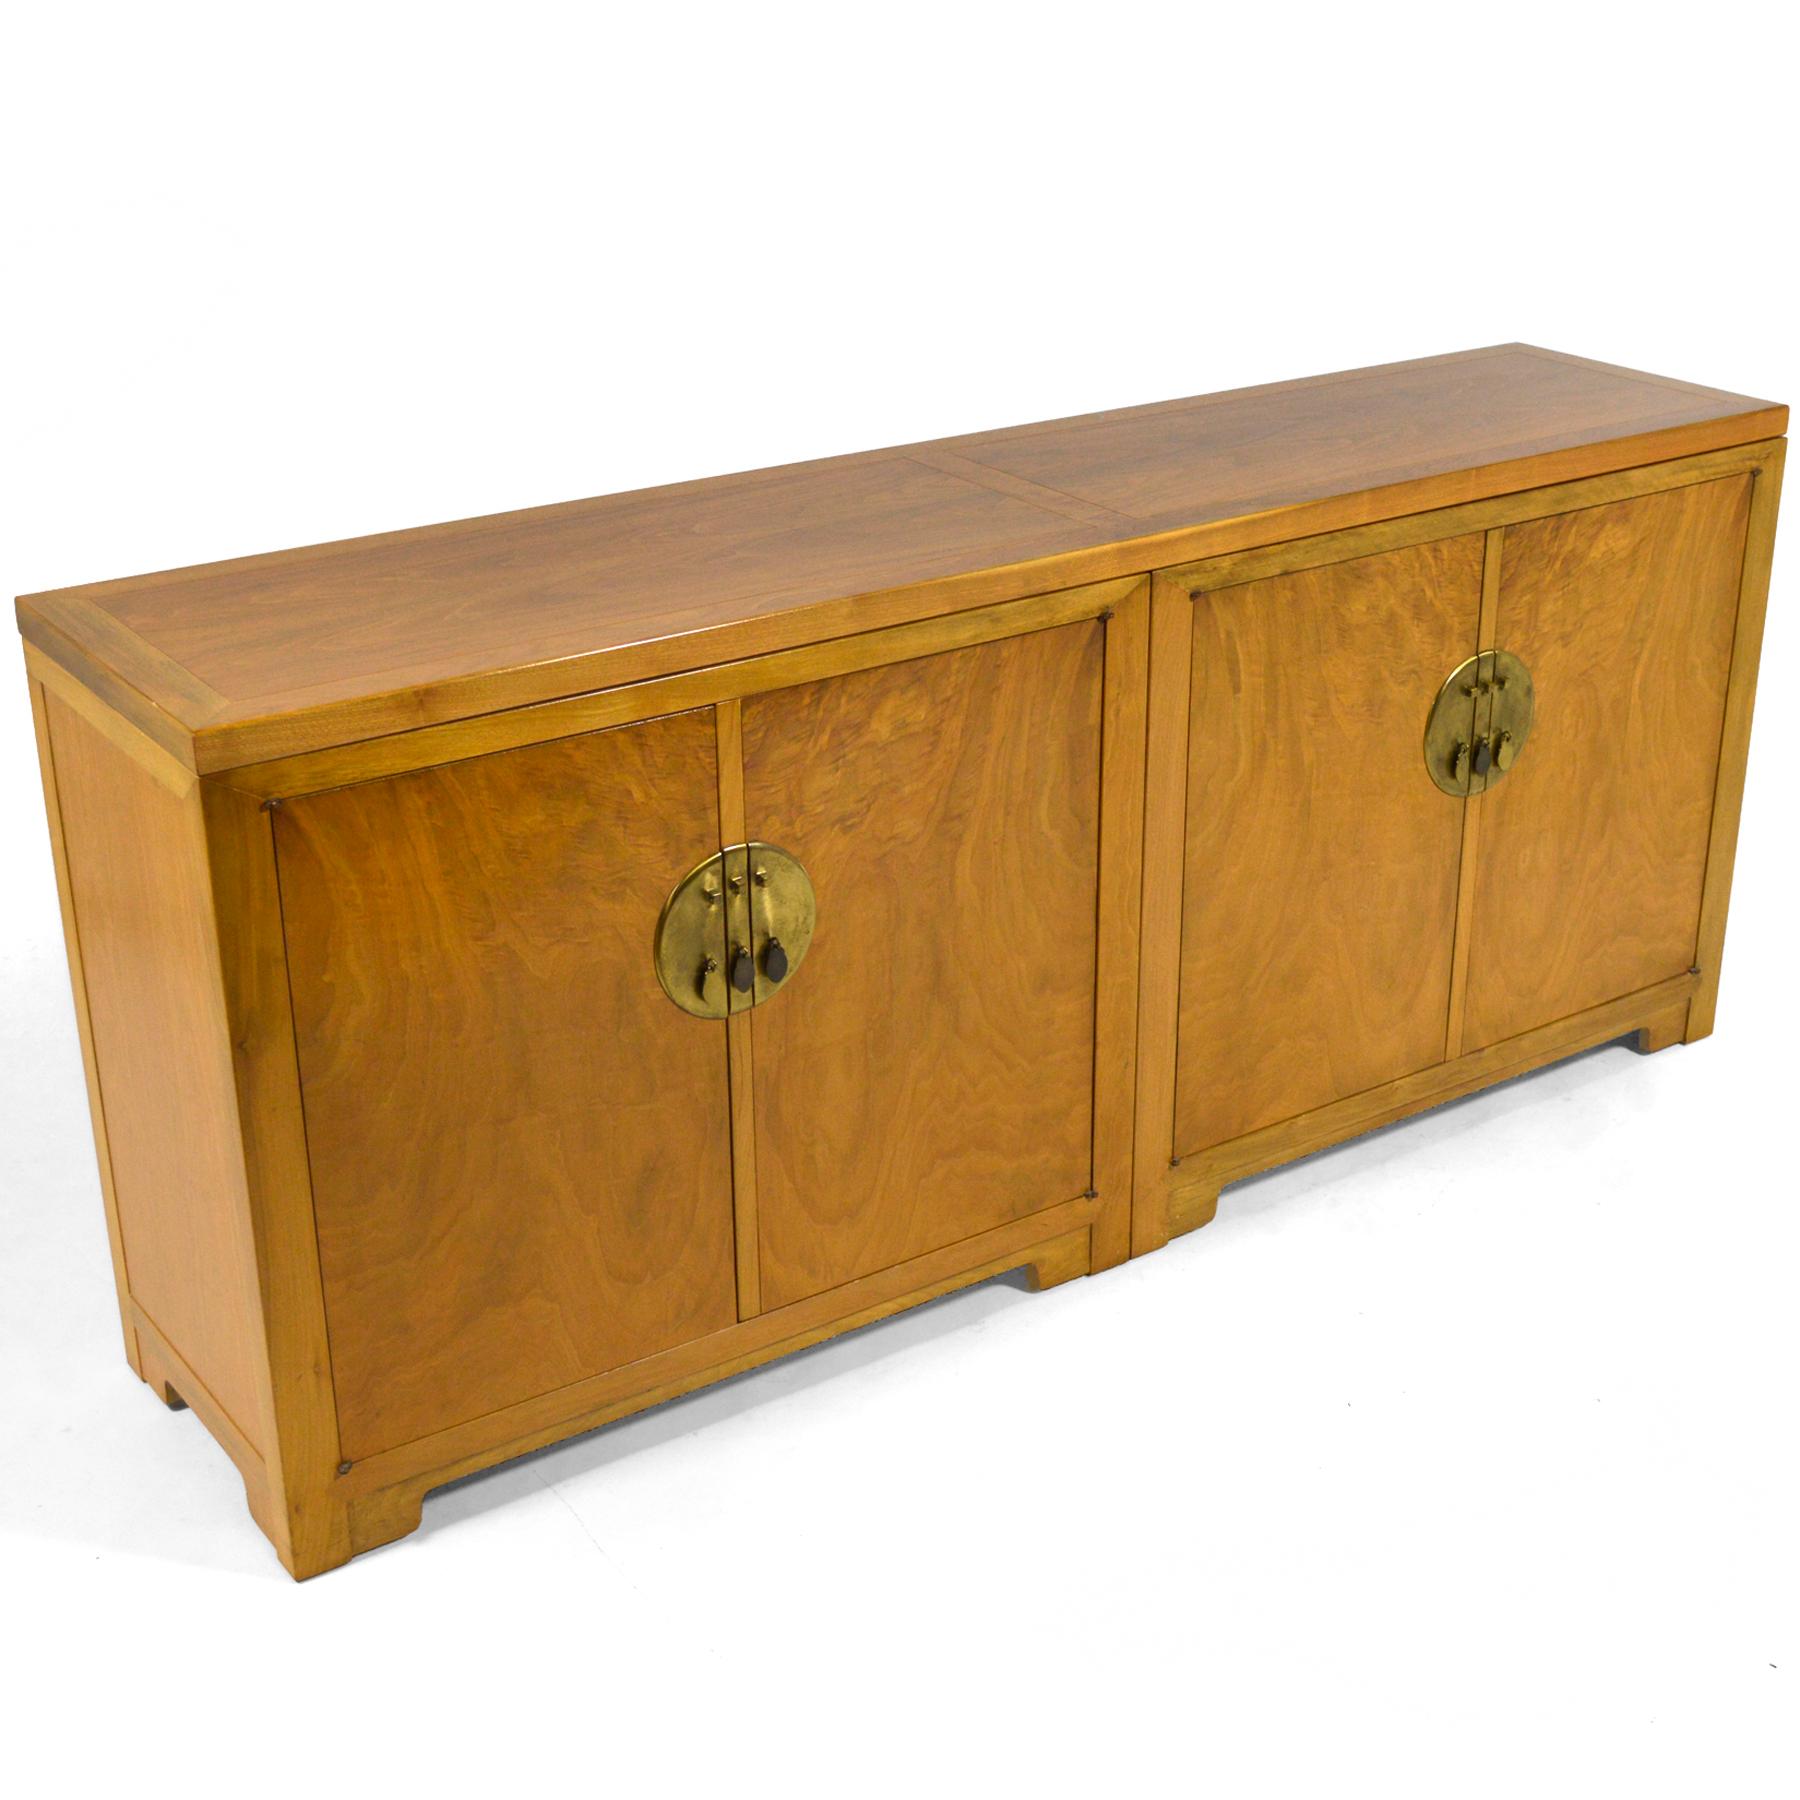 A great design in fantastic original condition, this Michael Taylor credenza by Baker Furniture is part of his 